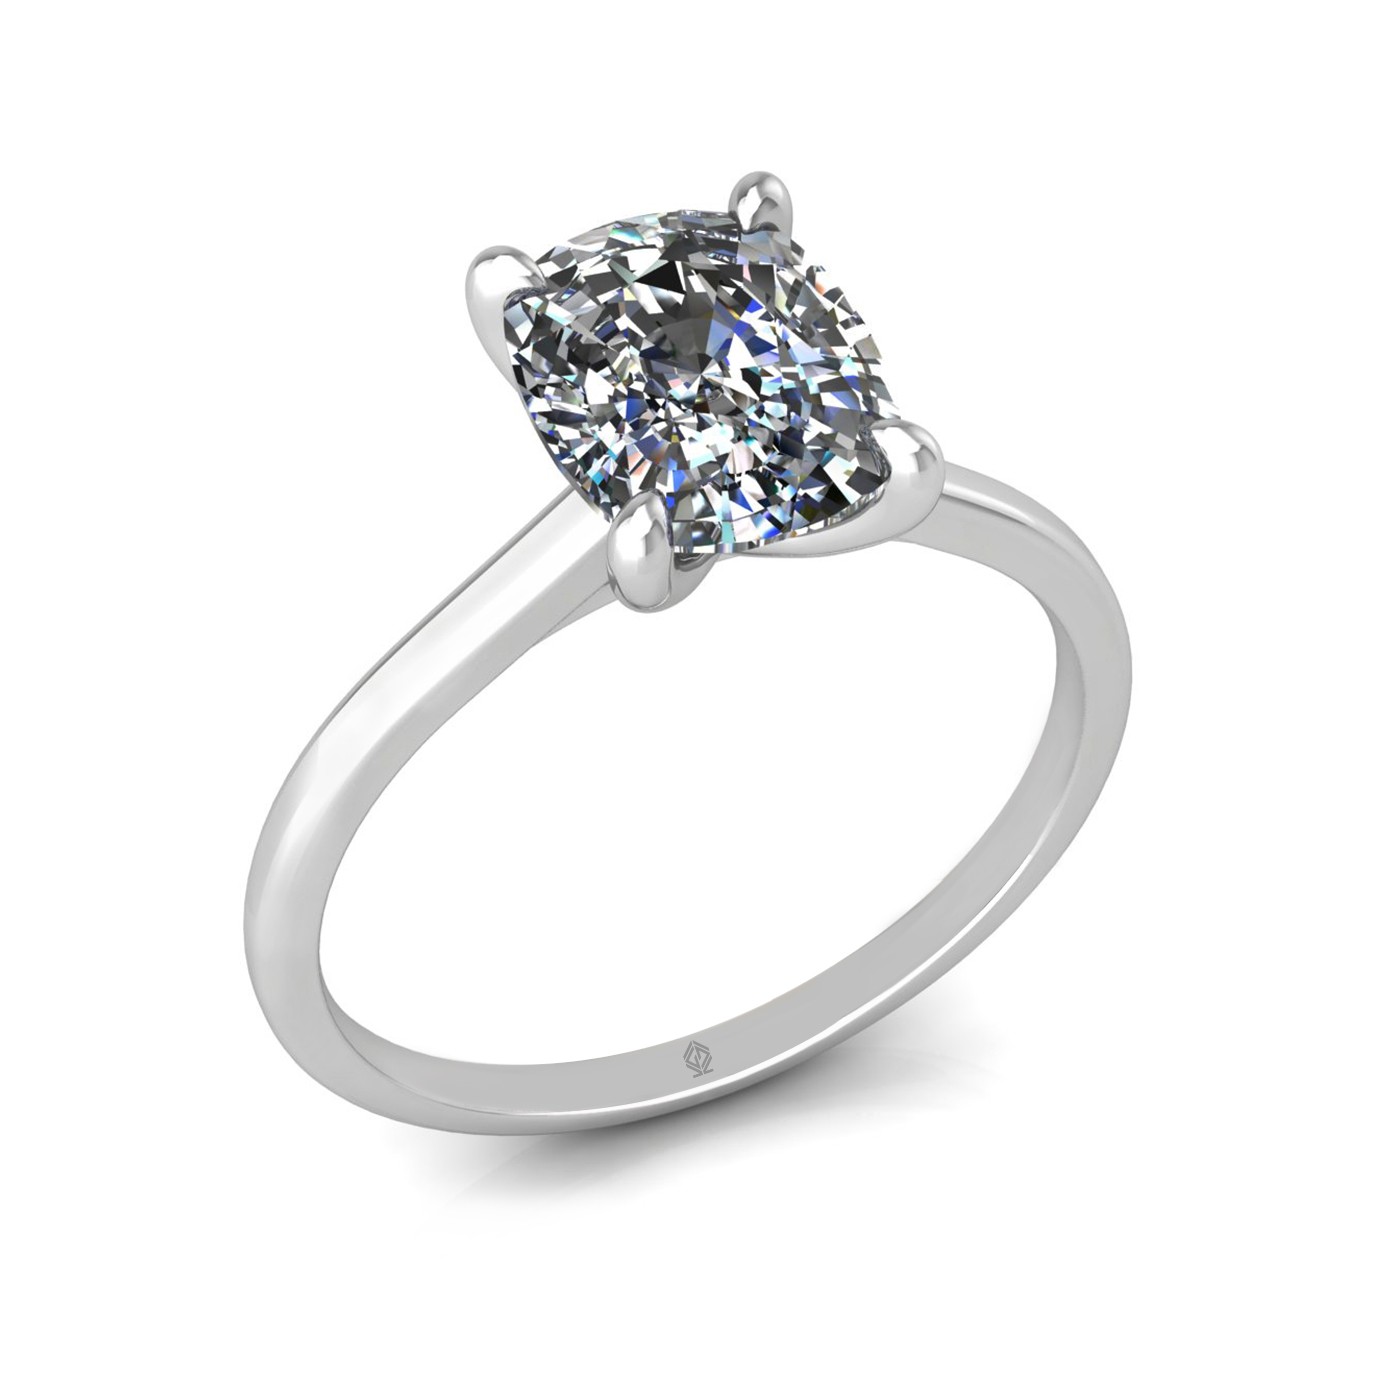 18k white gold  2.50 ct 4 prongs solitaire elongated cushion cut diamond engagement ring with whisper thin band